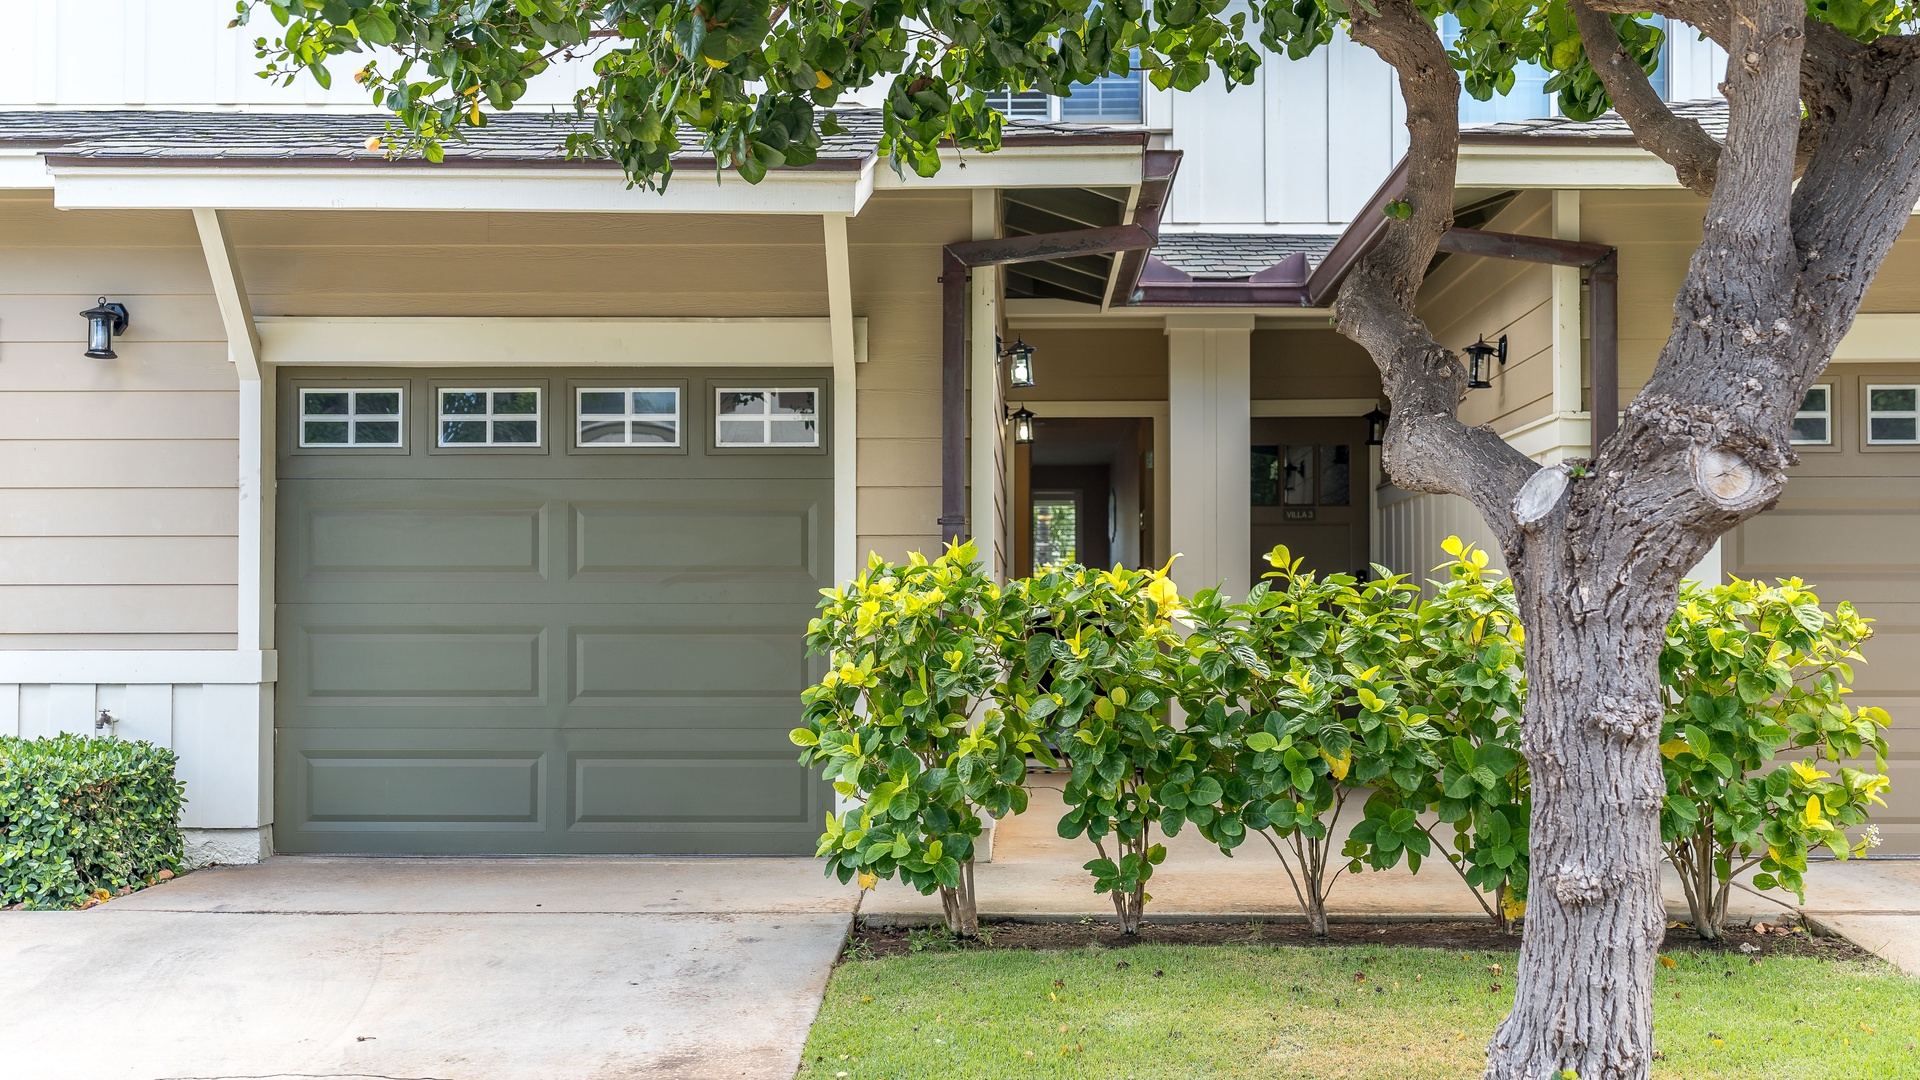 Kapolei Vacation Rentals, Hillside Villas 1508-2 - The paved drive up to the garage.